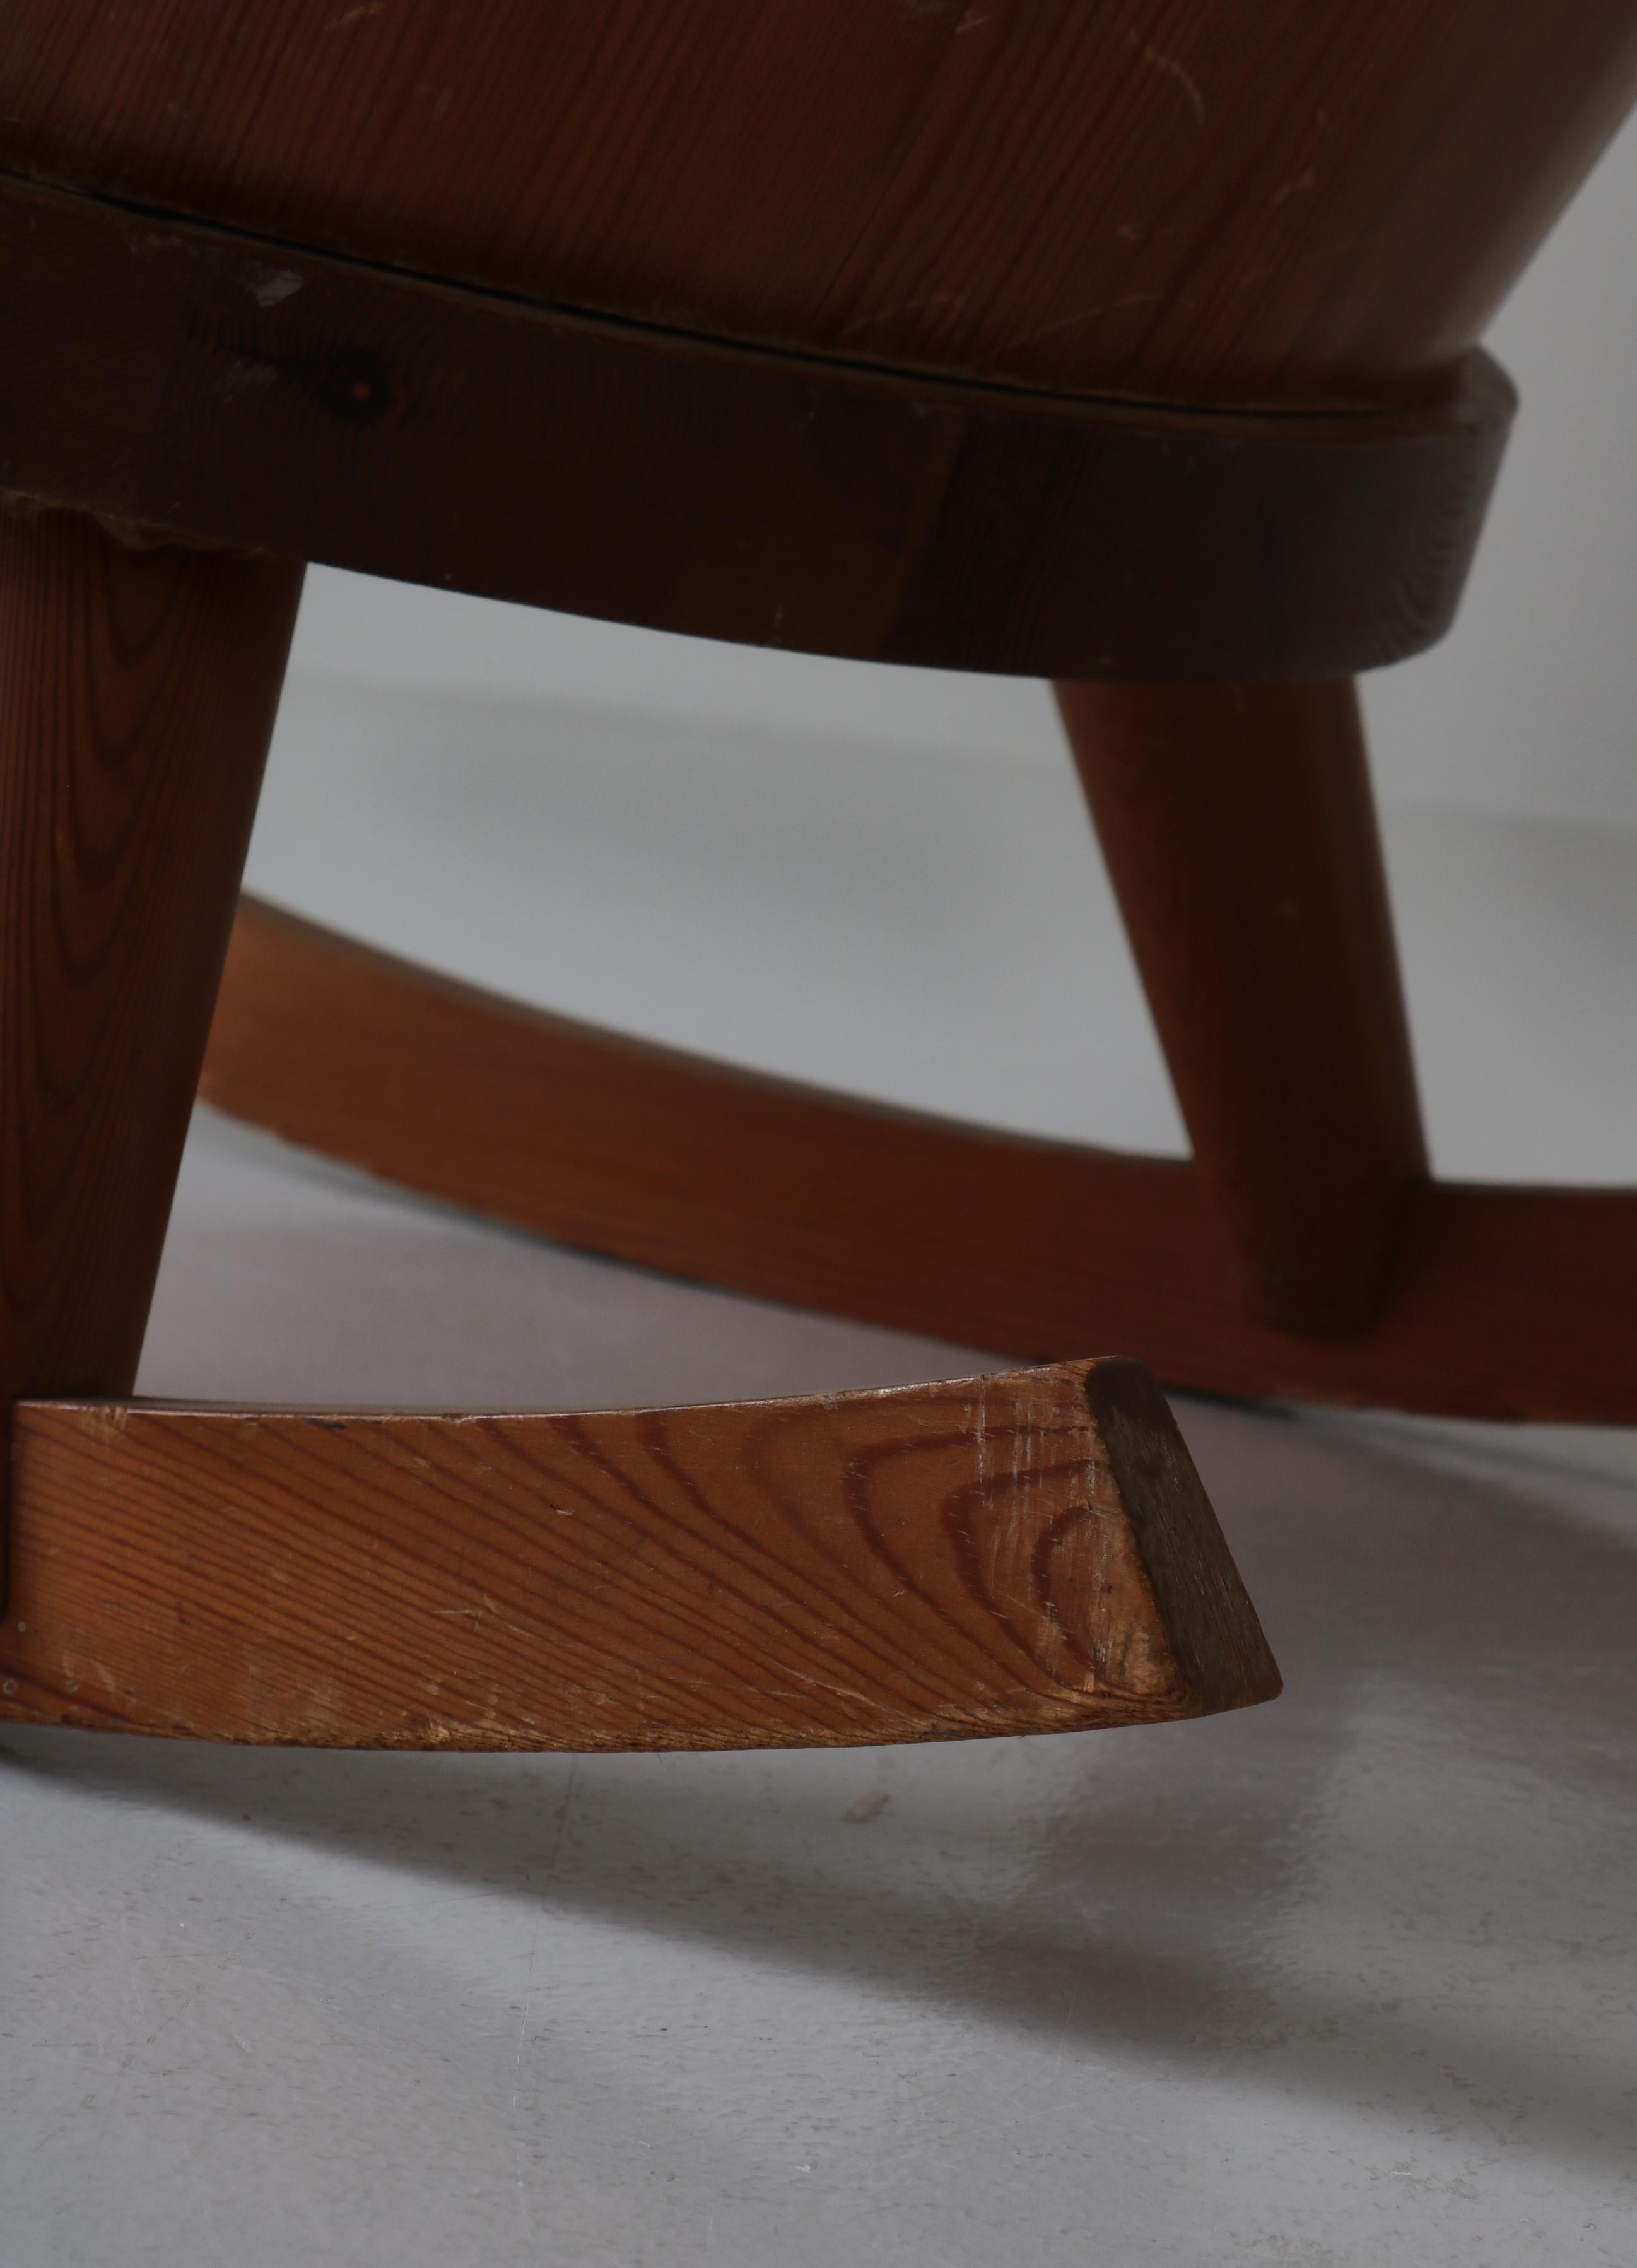 Mid-20th Century Rocking Chair in Pine by Torsten Claeson for Svensk Fur, Swedish Modern, 1930s For Sale